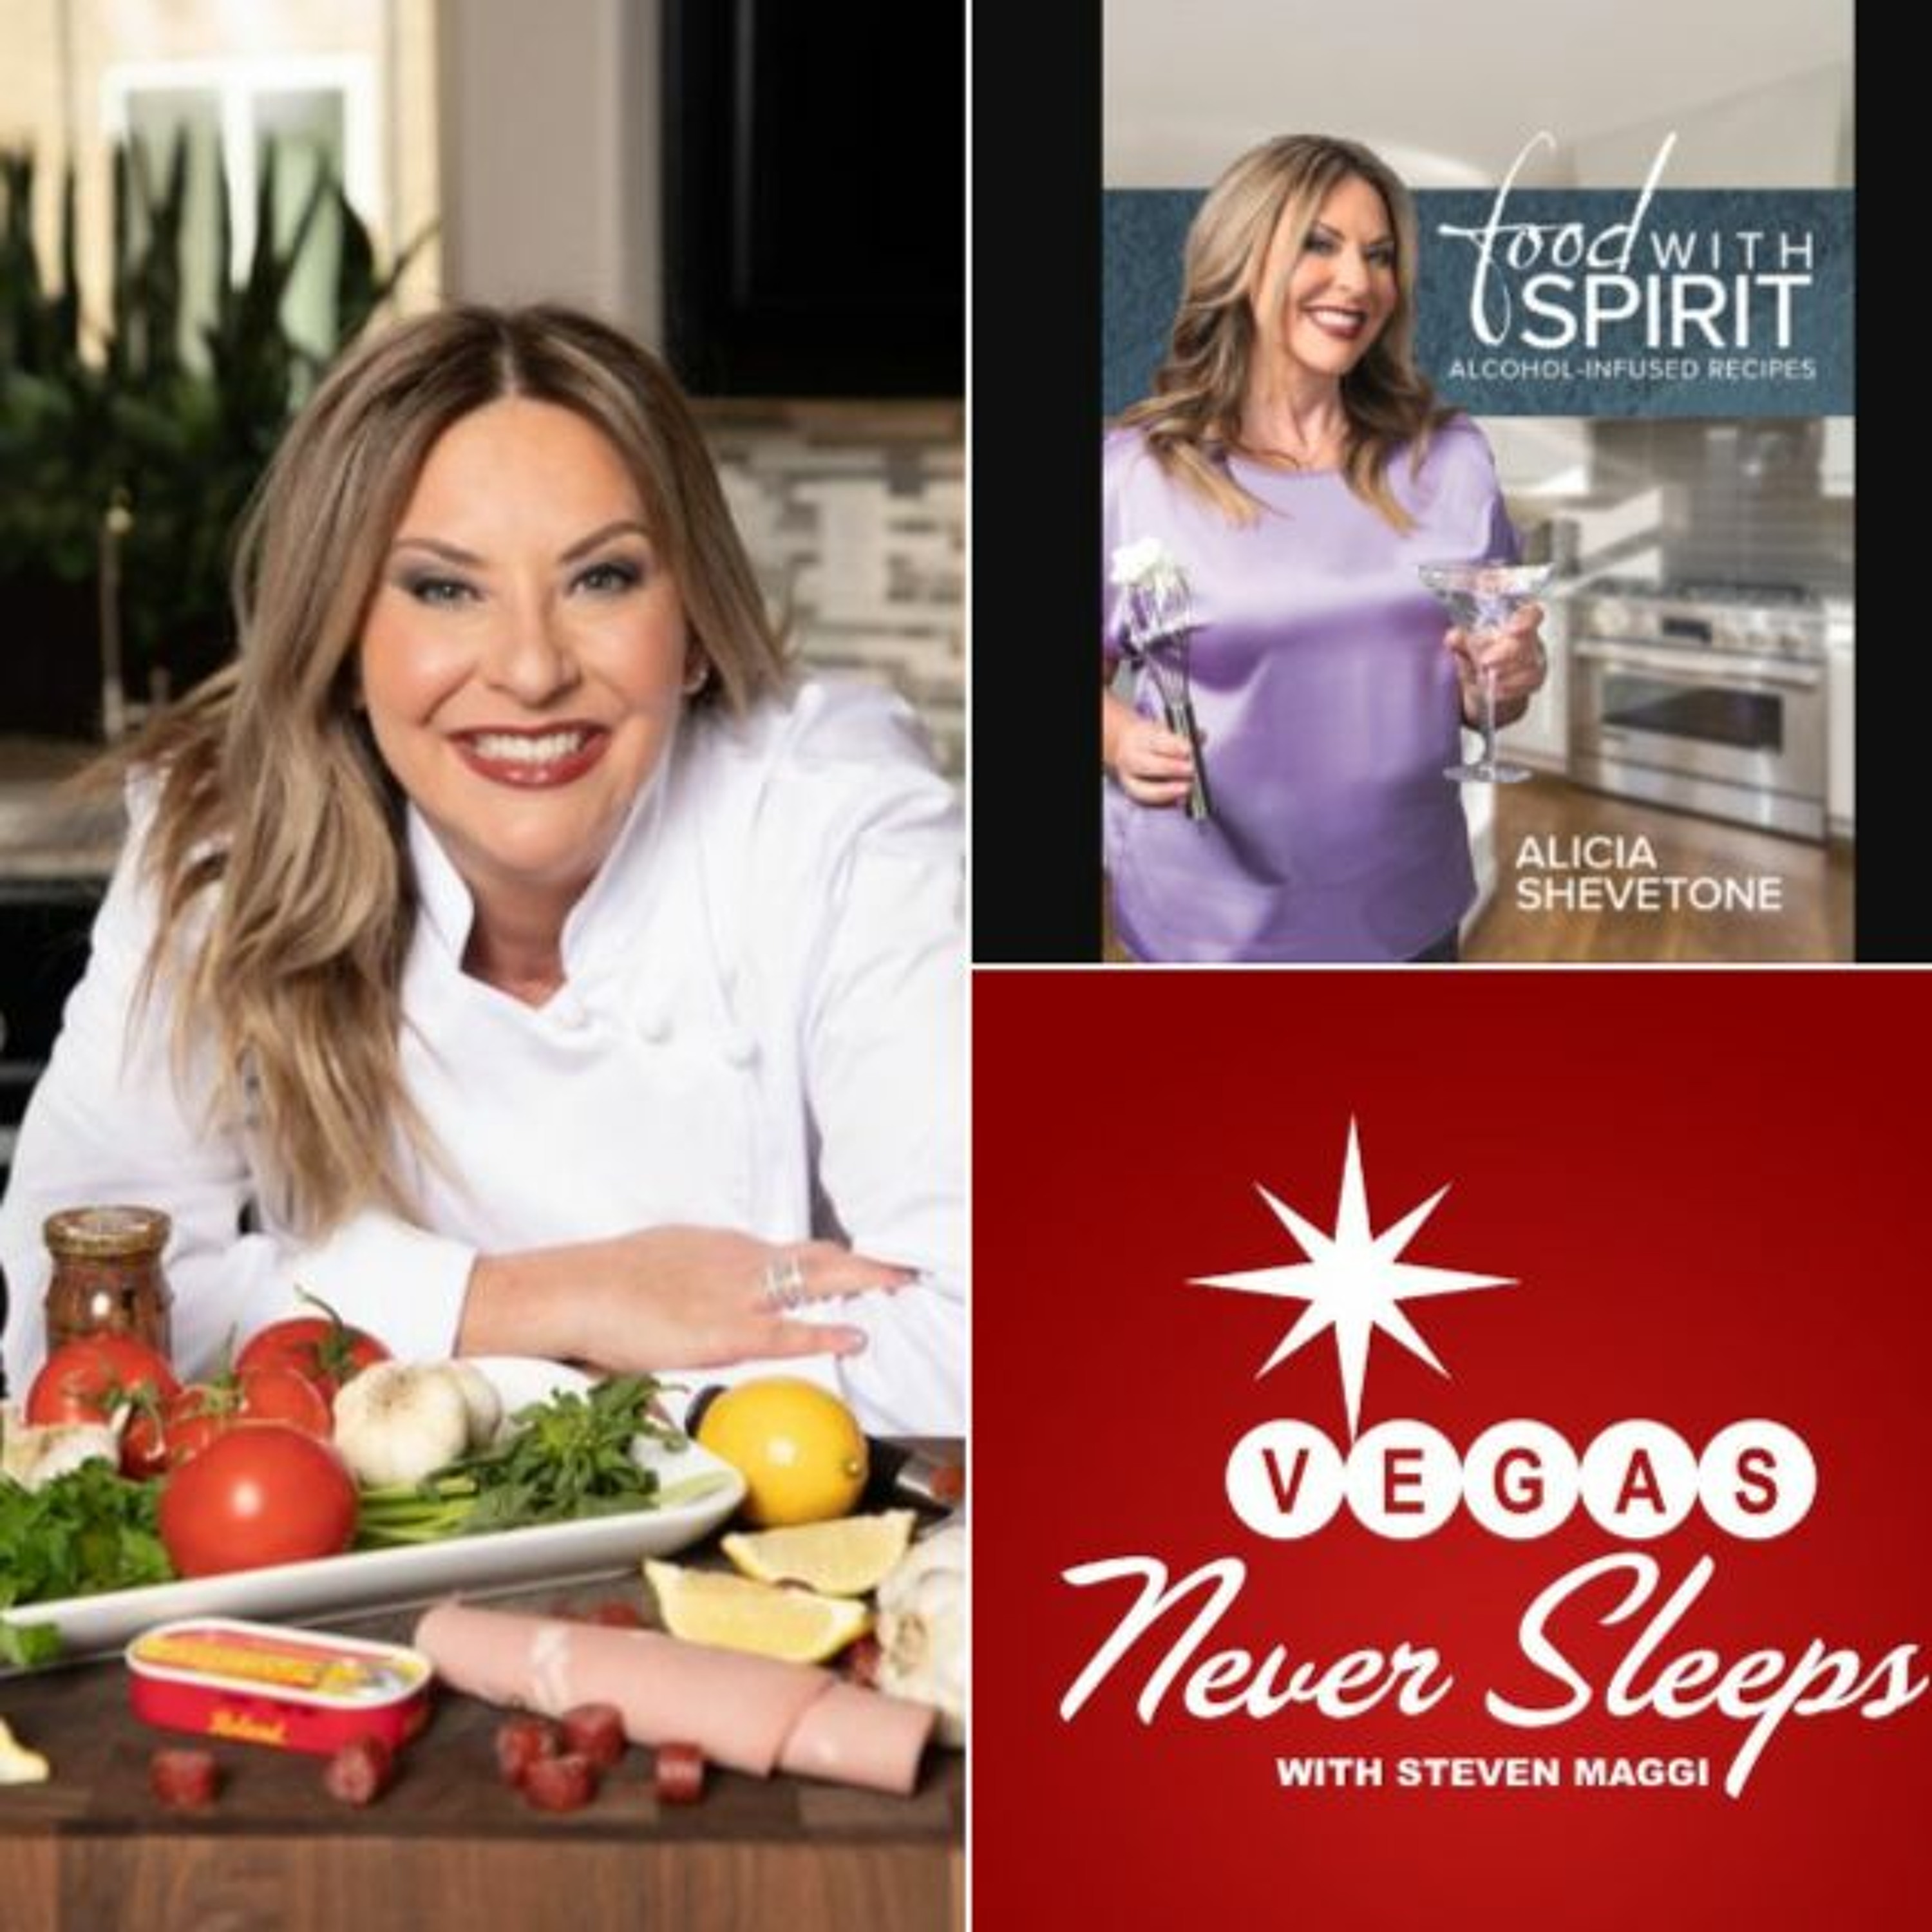 ”Food With Spirit” - The Complete Chef Alicia Shevetone Interview